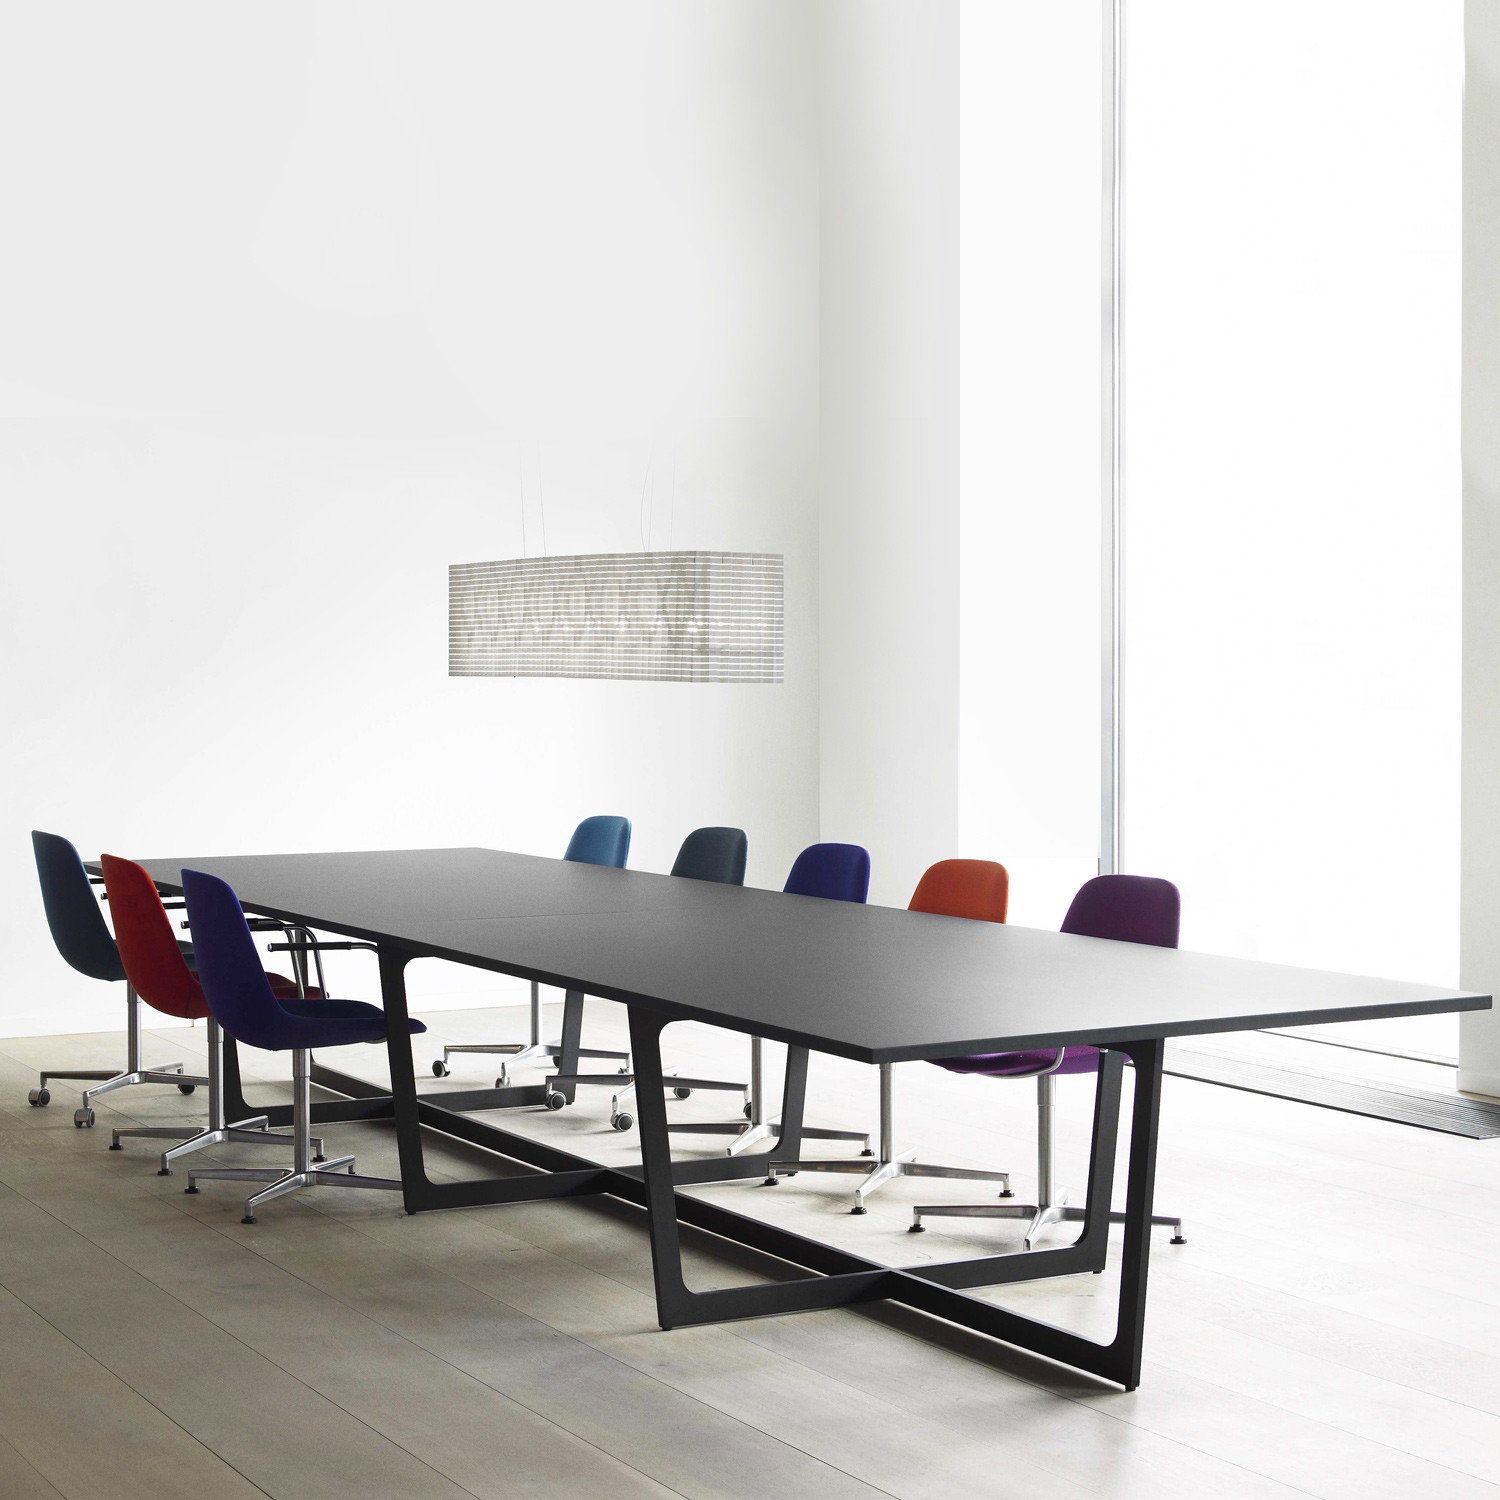 Insula Conference Table